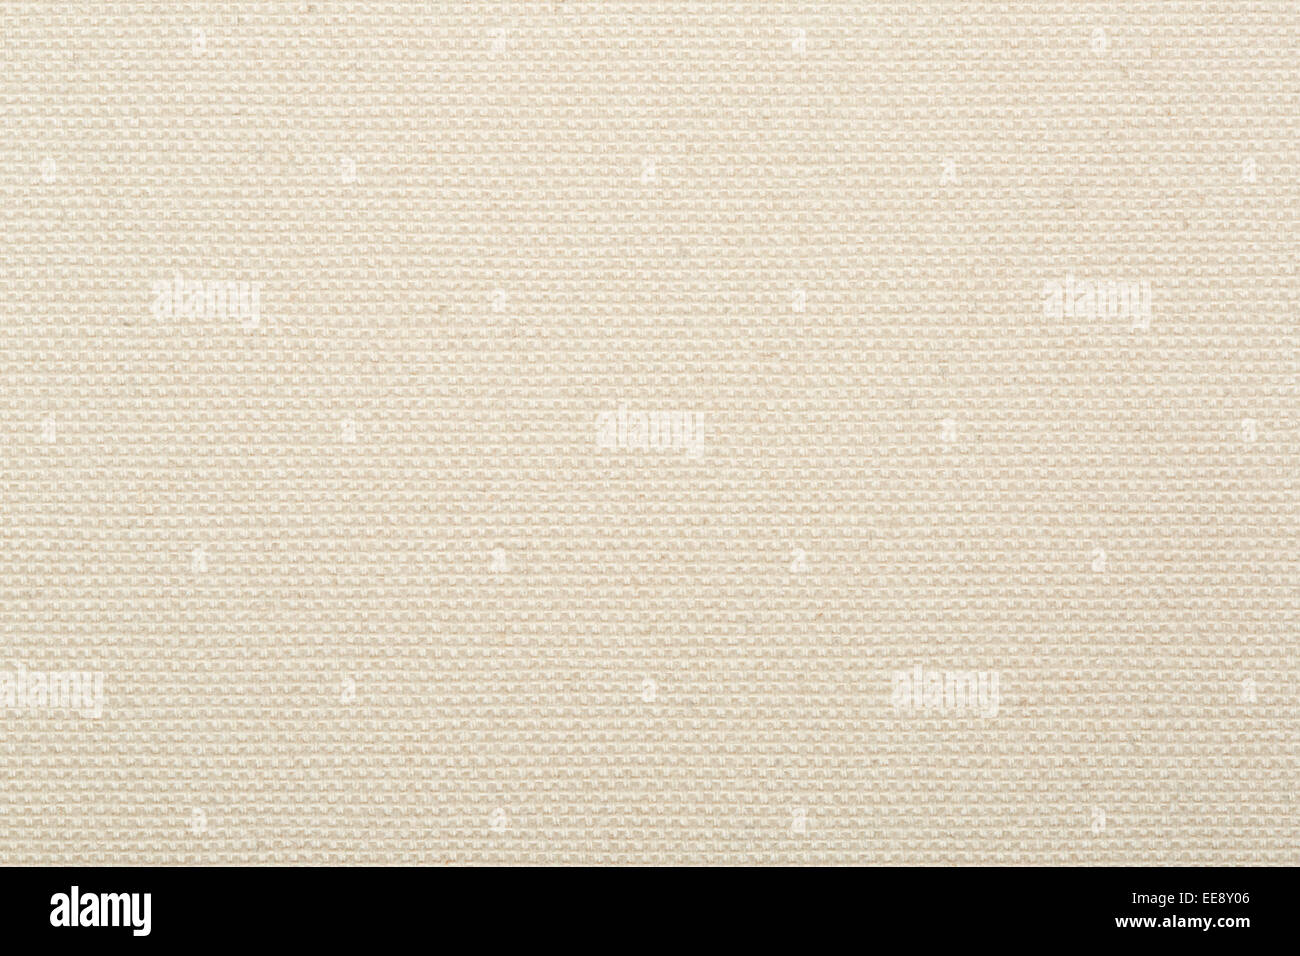 Canvas natural beige texture background Stock Photo